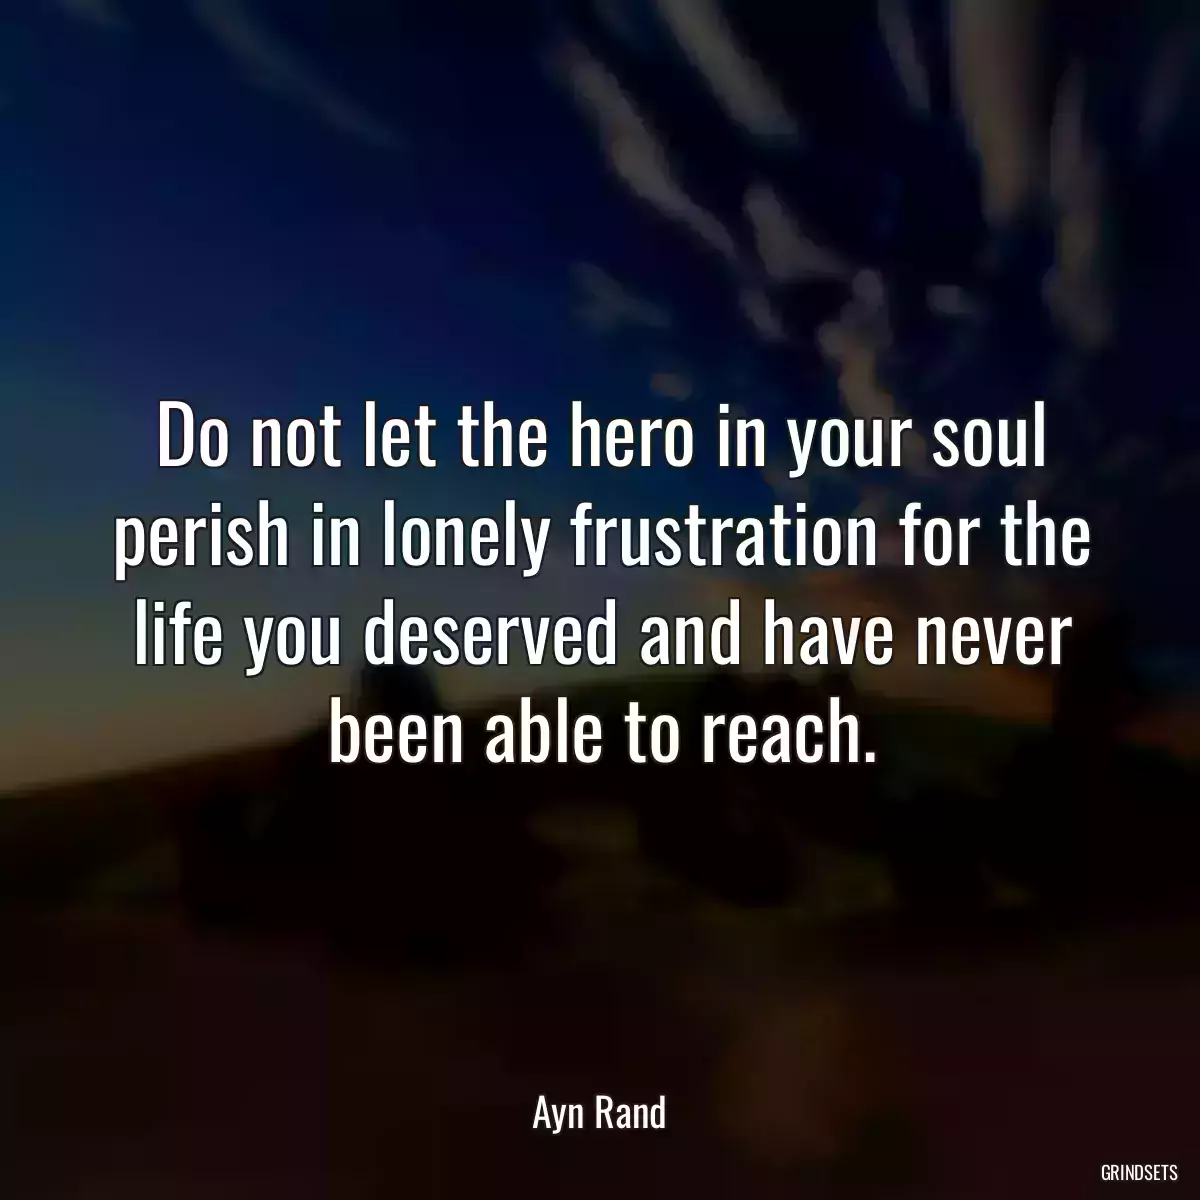 Do not let the hero in your soul perish in lonely frustration for the life you deserved and have never been able to reach.